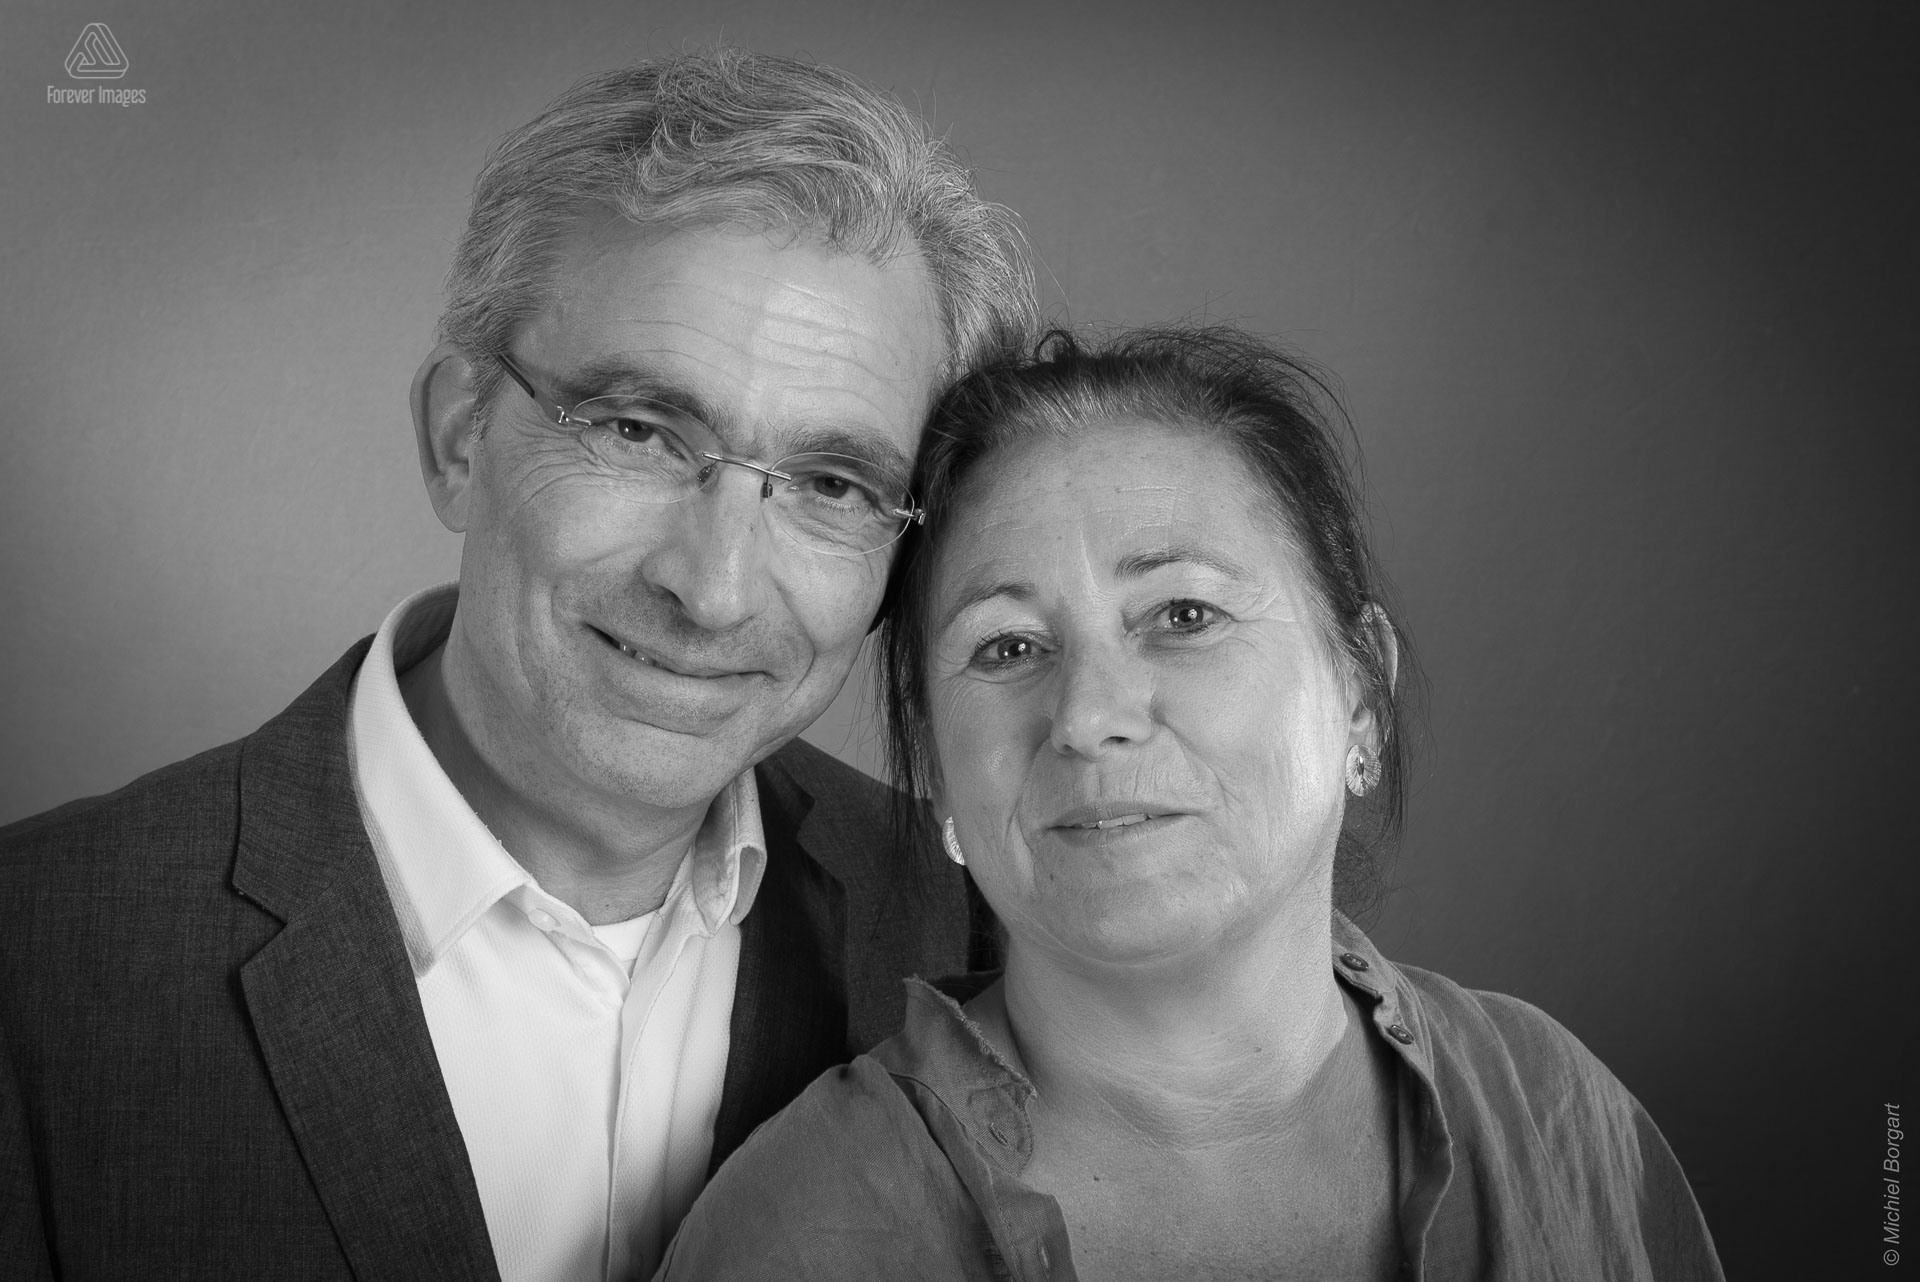 Loveshoot in black and white B&W friendly couple | Bas | Portrait Photographer Michiel Borgart - Forever Images.